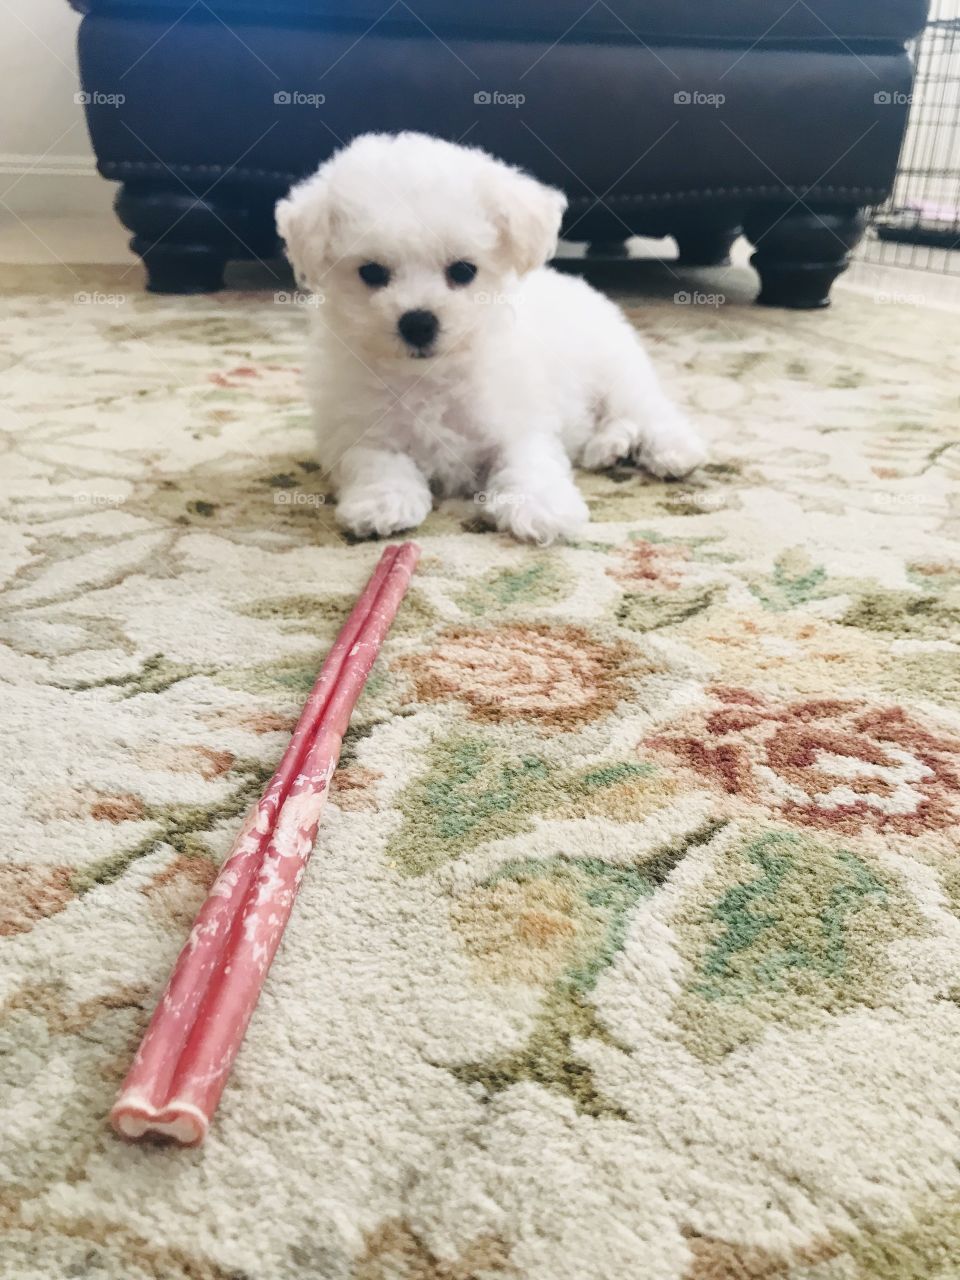 Tiny pooch with giant stick on carpet. Small fluffy white dog eyeballing enormous chew stick.